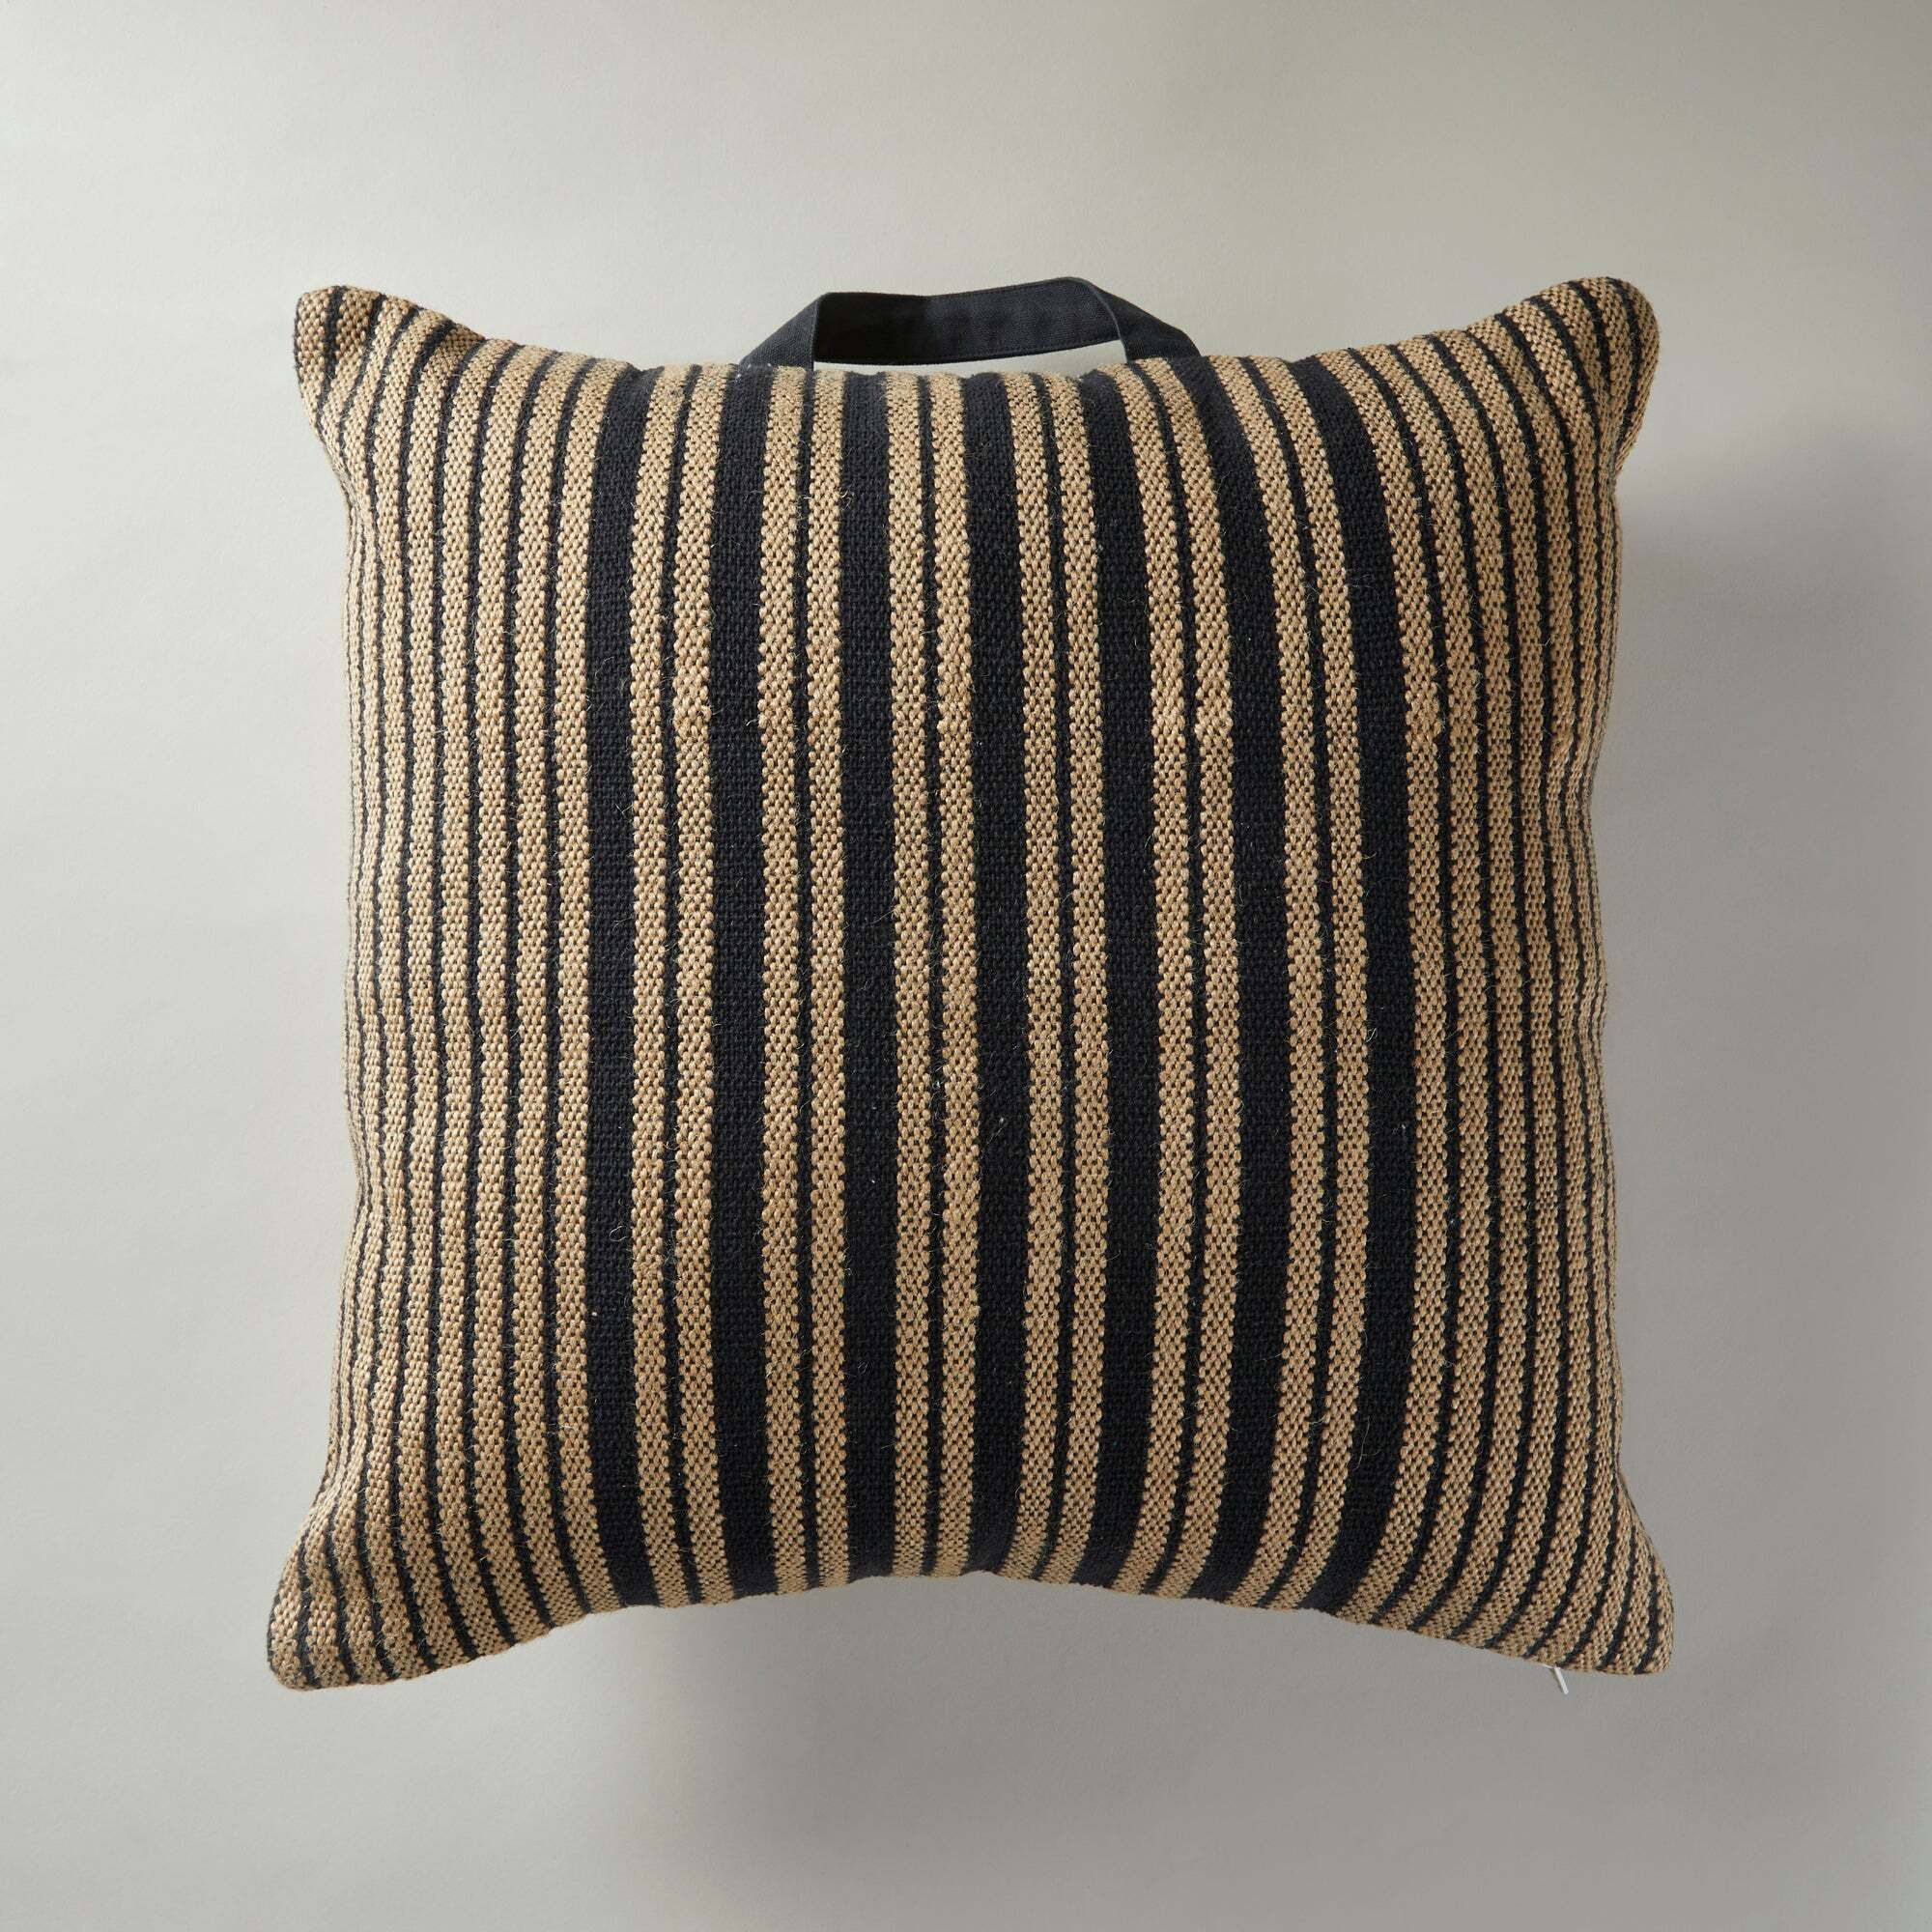 Jute and Cotton Floor Cushion Brown and Black